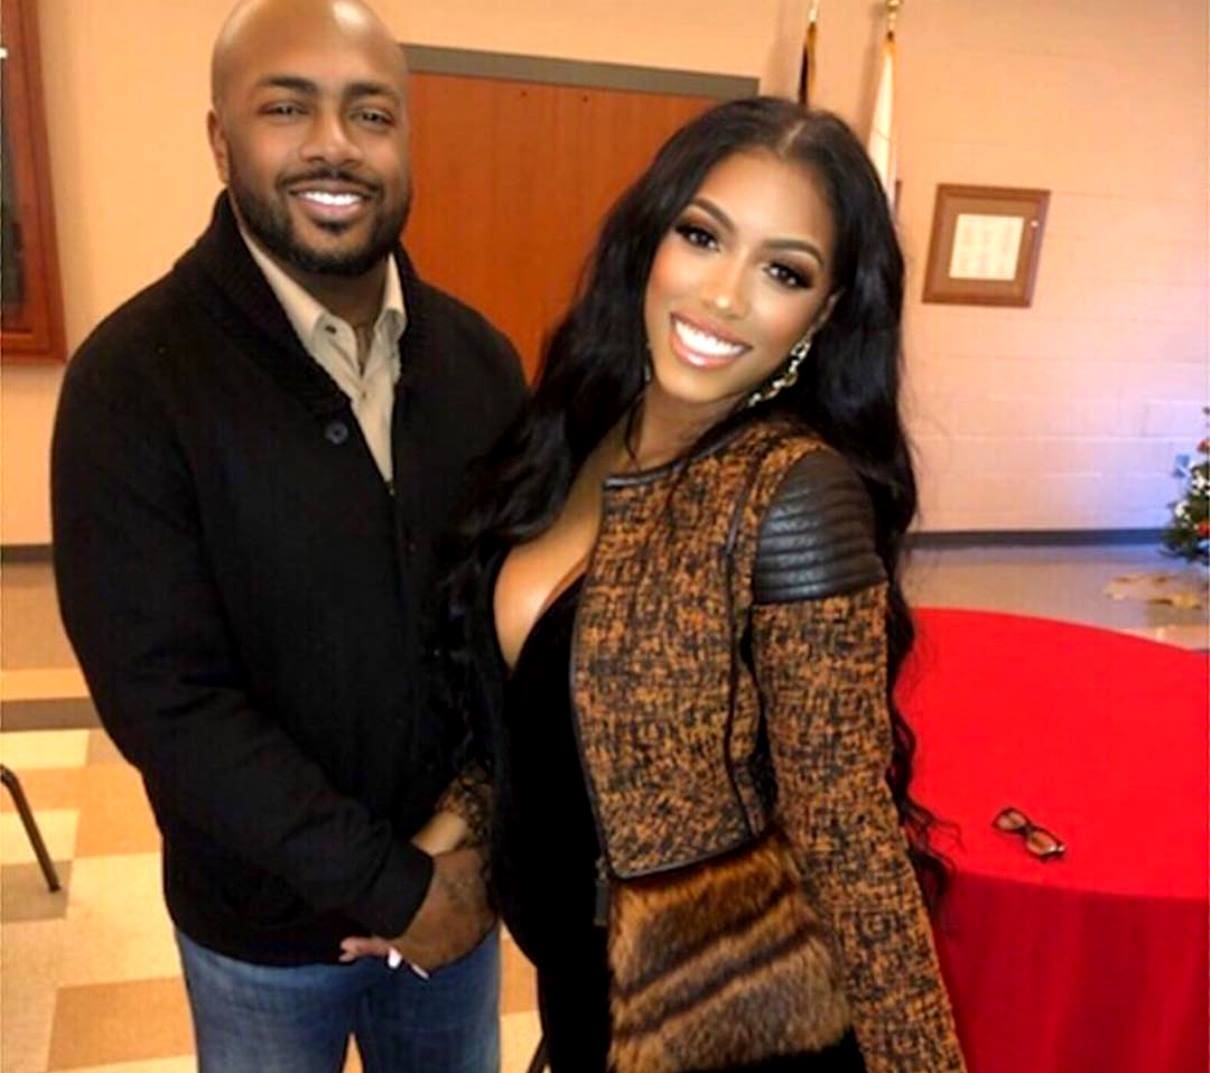 Porsha Williams Has Fans Emotional With A Clip Featuring Dennis McKinley And Baby Girl PJ